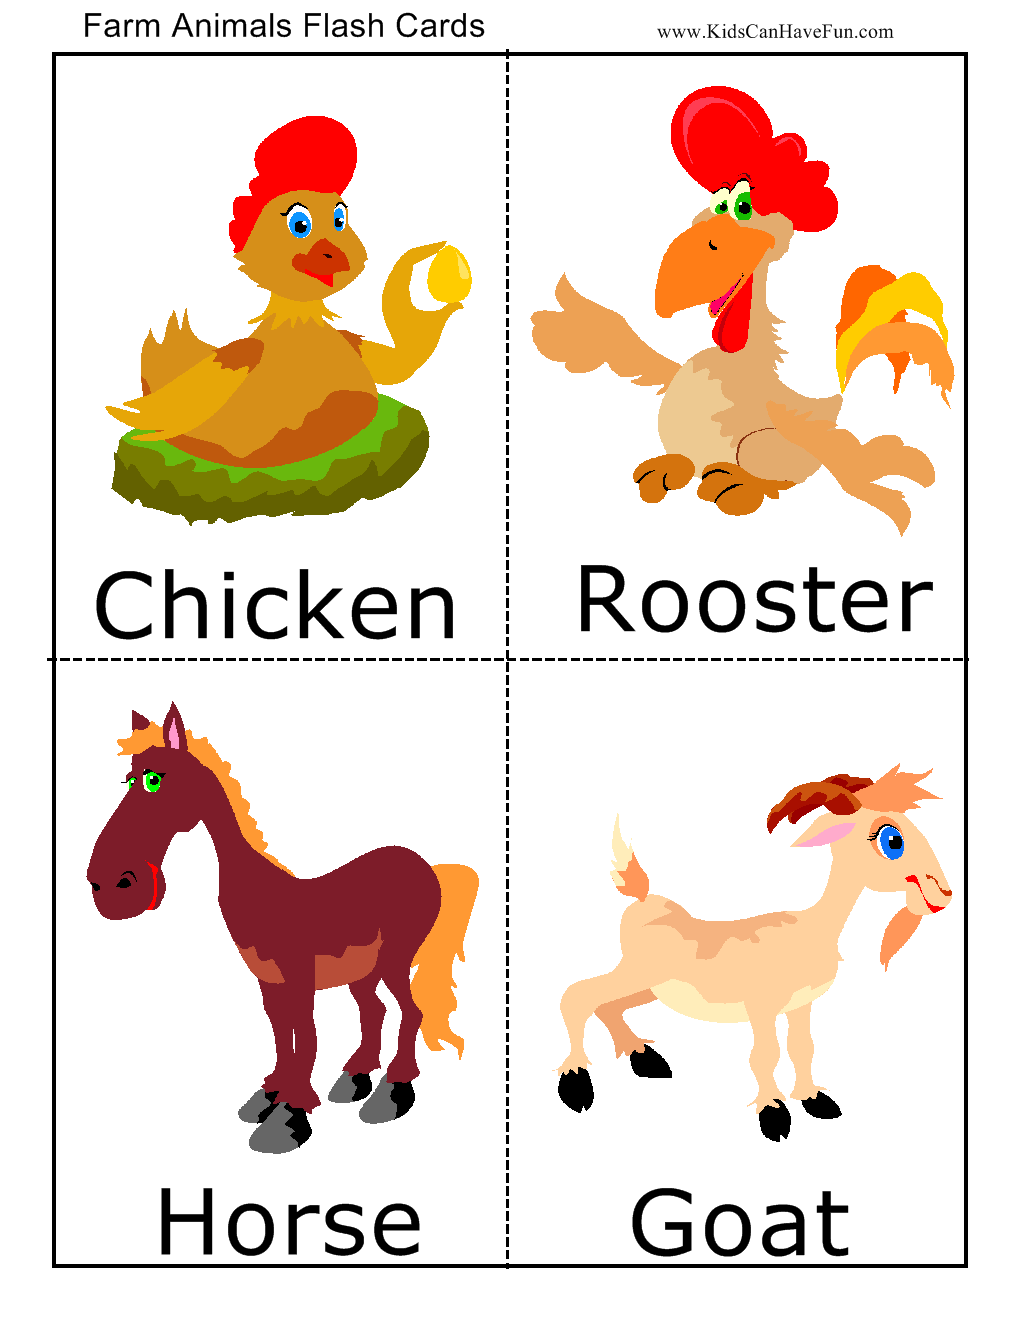 CARDS FOR KIDS FARM ANIMALS FLASH CARDS